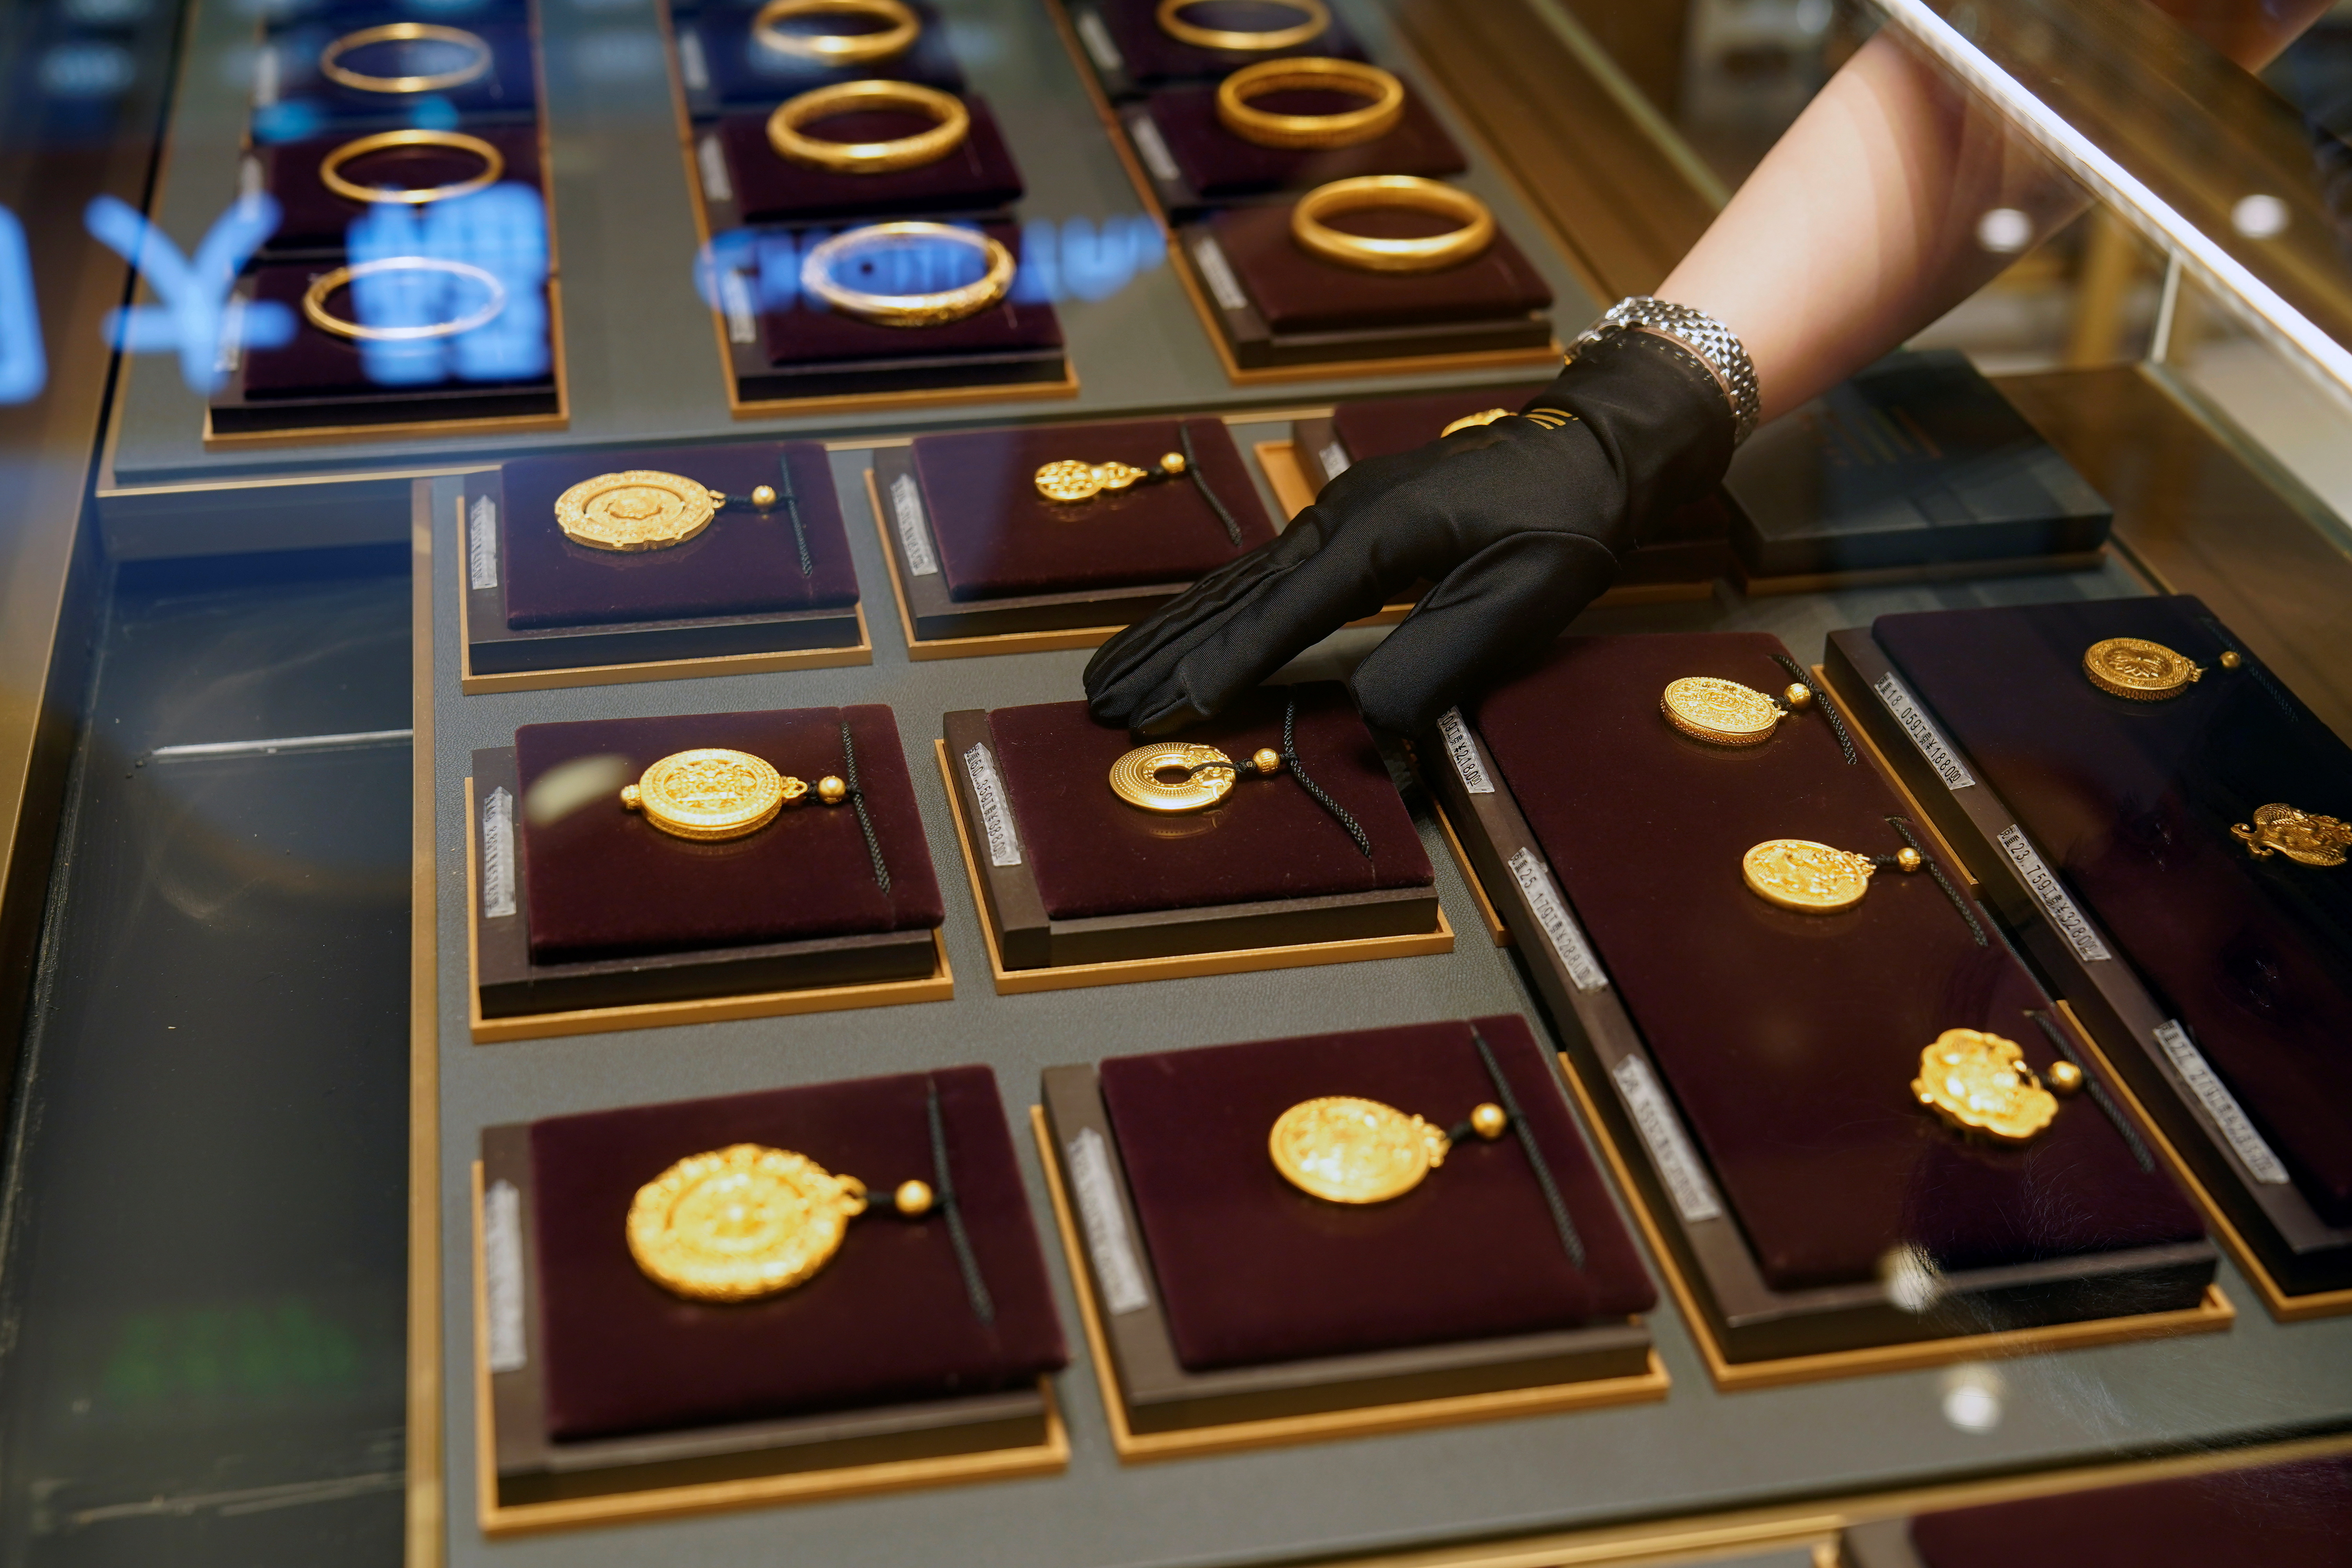 A salesperson poses with Heritage Gold jewellery at jeweller Chow Tai Fook’s retail store in Shanghai